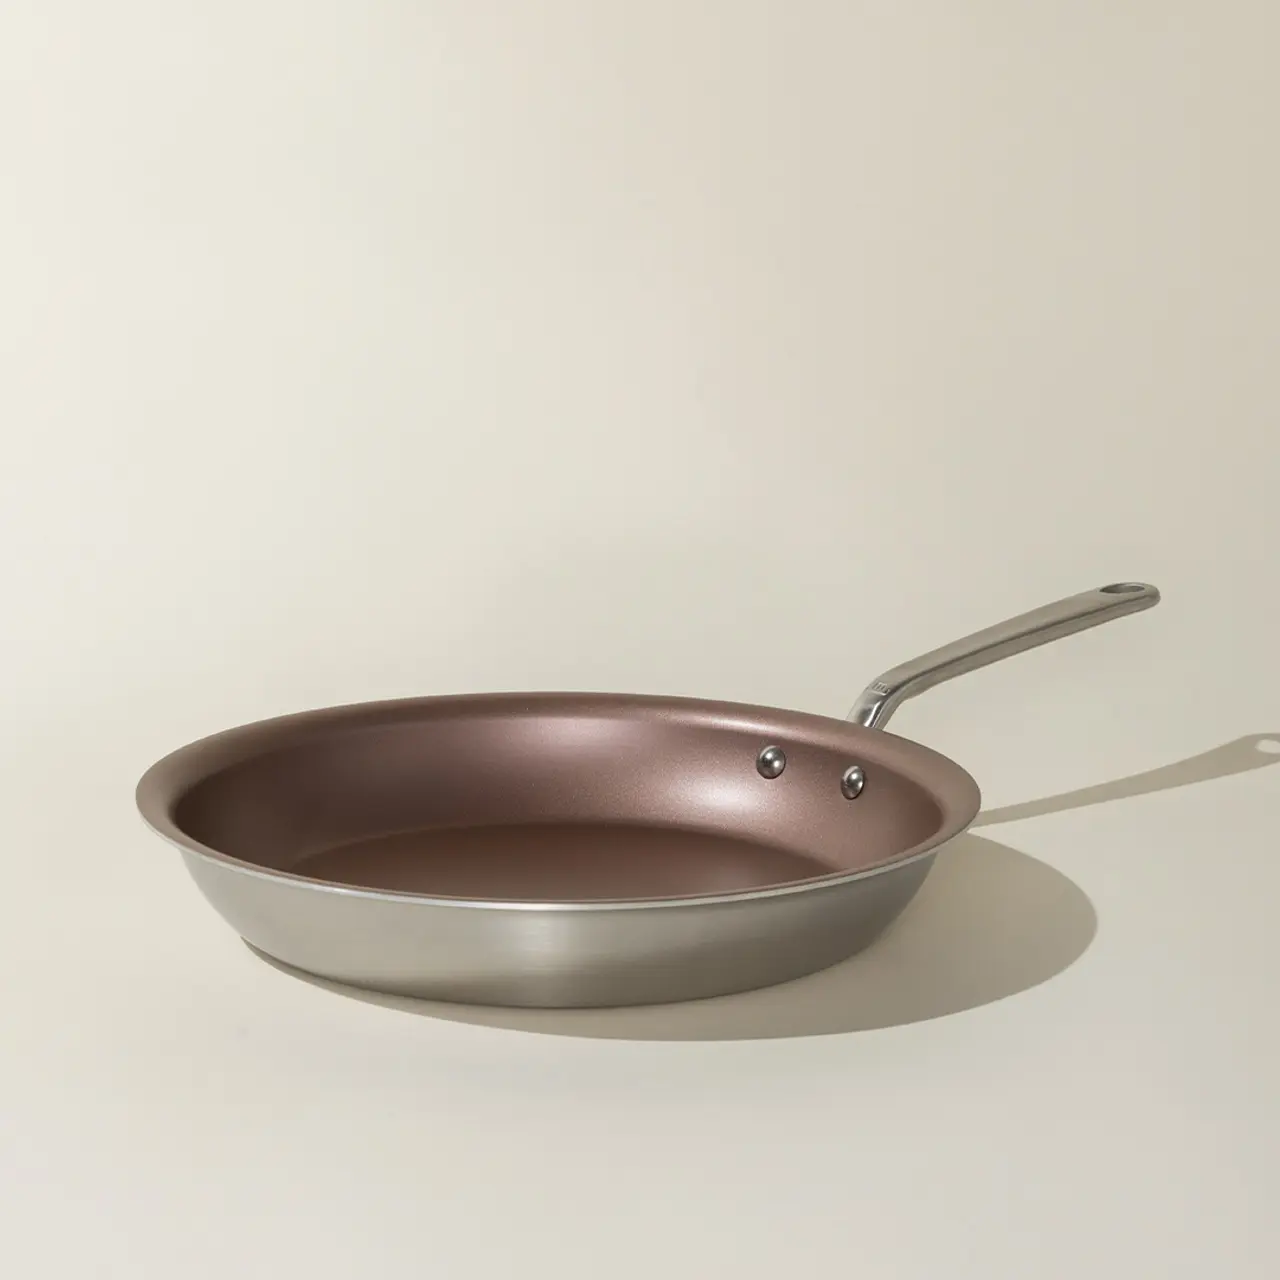 A non-stick frying pan with a stainless steel handle sits on a neutral background.